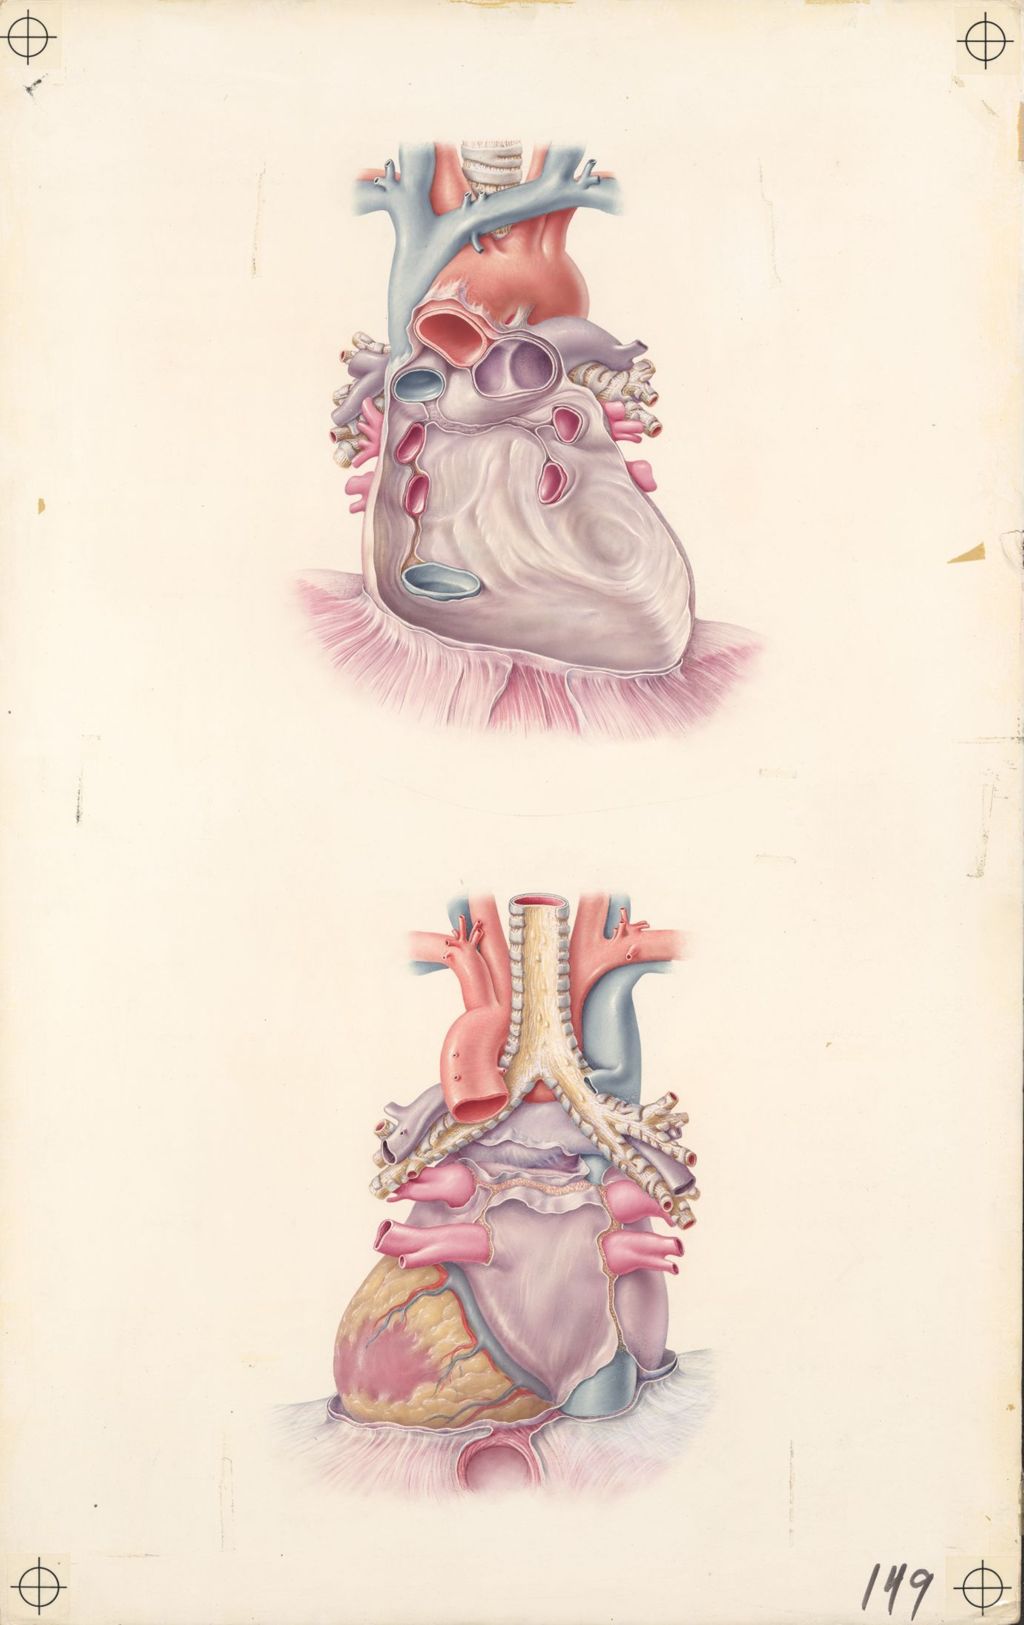 Miniature of Views of the heart